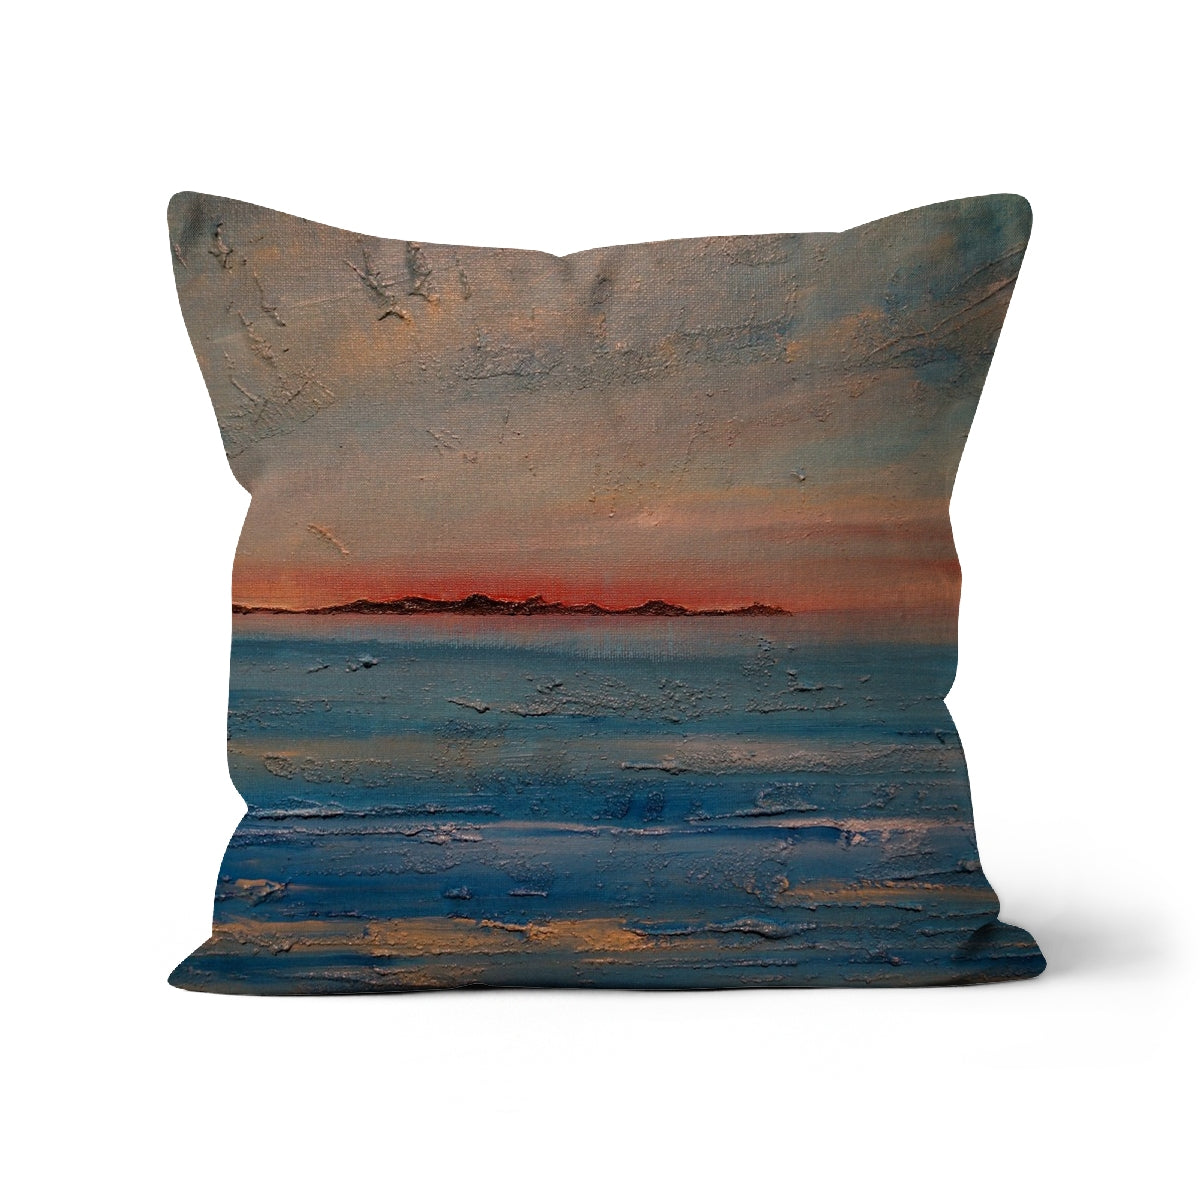 Gigha Sunset Art Gifts Cushion-Cushions-Hebridean Islands Art Gallery-Faux Suede-18"x18"-Paintings, Prints, Homeware, Art Gifts From Scotland By Scottish Artist Kevin Hunter